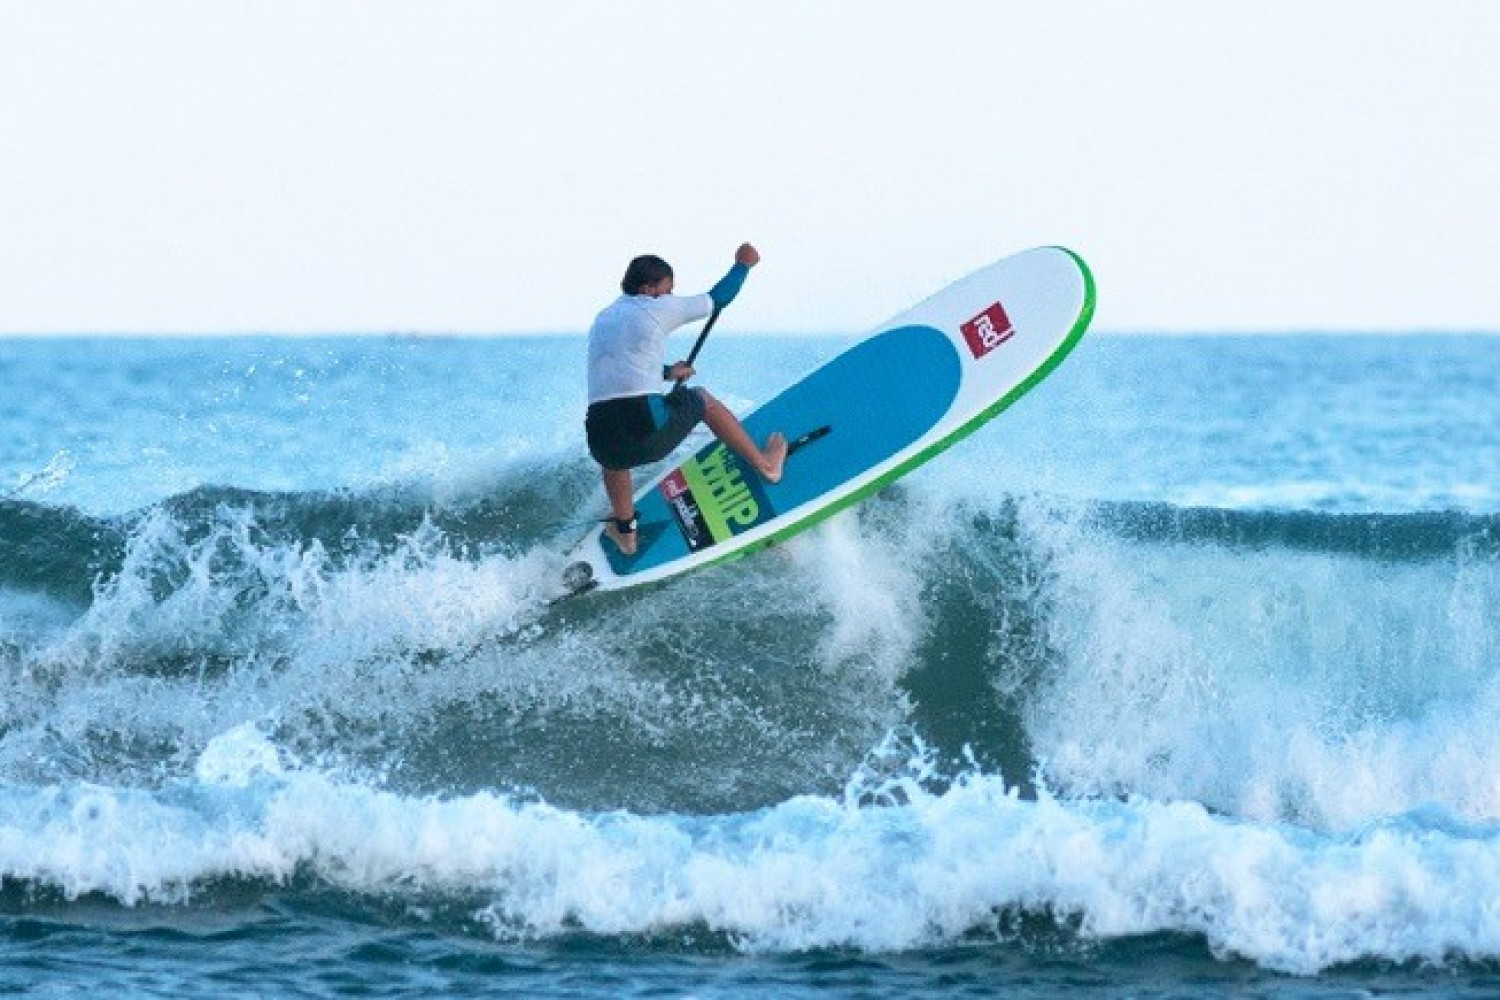 Red Paddle Co wins Euro SUPA Surf Title with new Surf design - The Whip. 